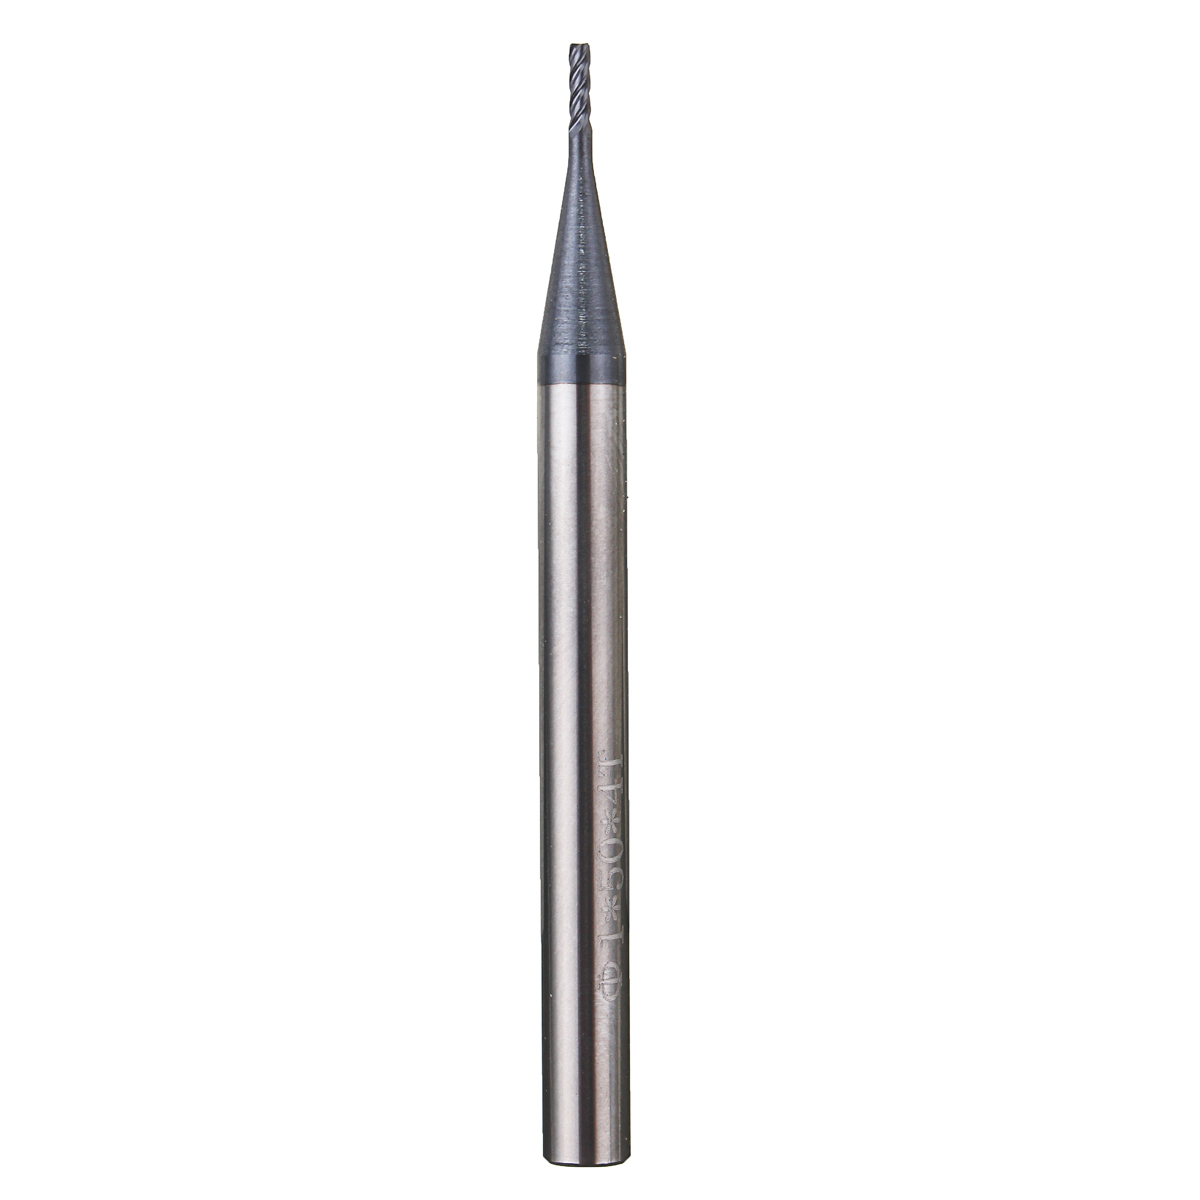 Drillpro-1mm-4-Flutes-End-Mill-Cutter-50mm-Length-Tungsten-Carbide-Milling-Cutter-CNC-Tool-1516233-6